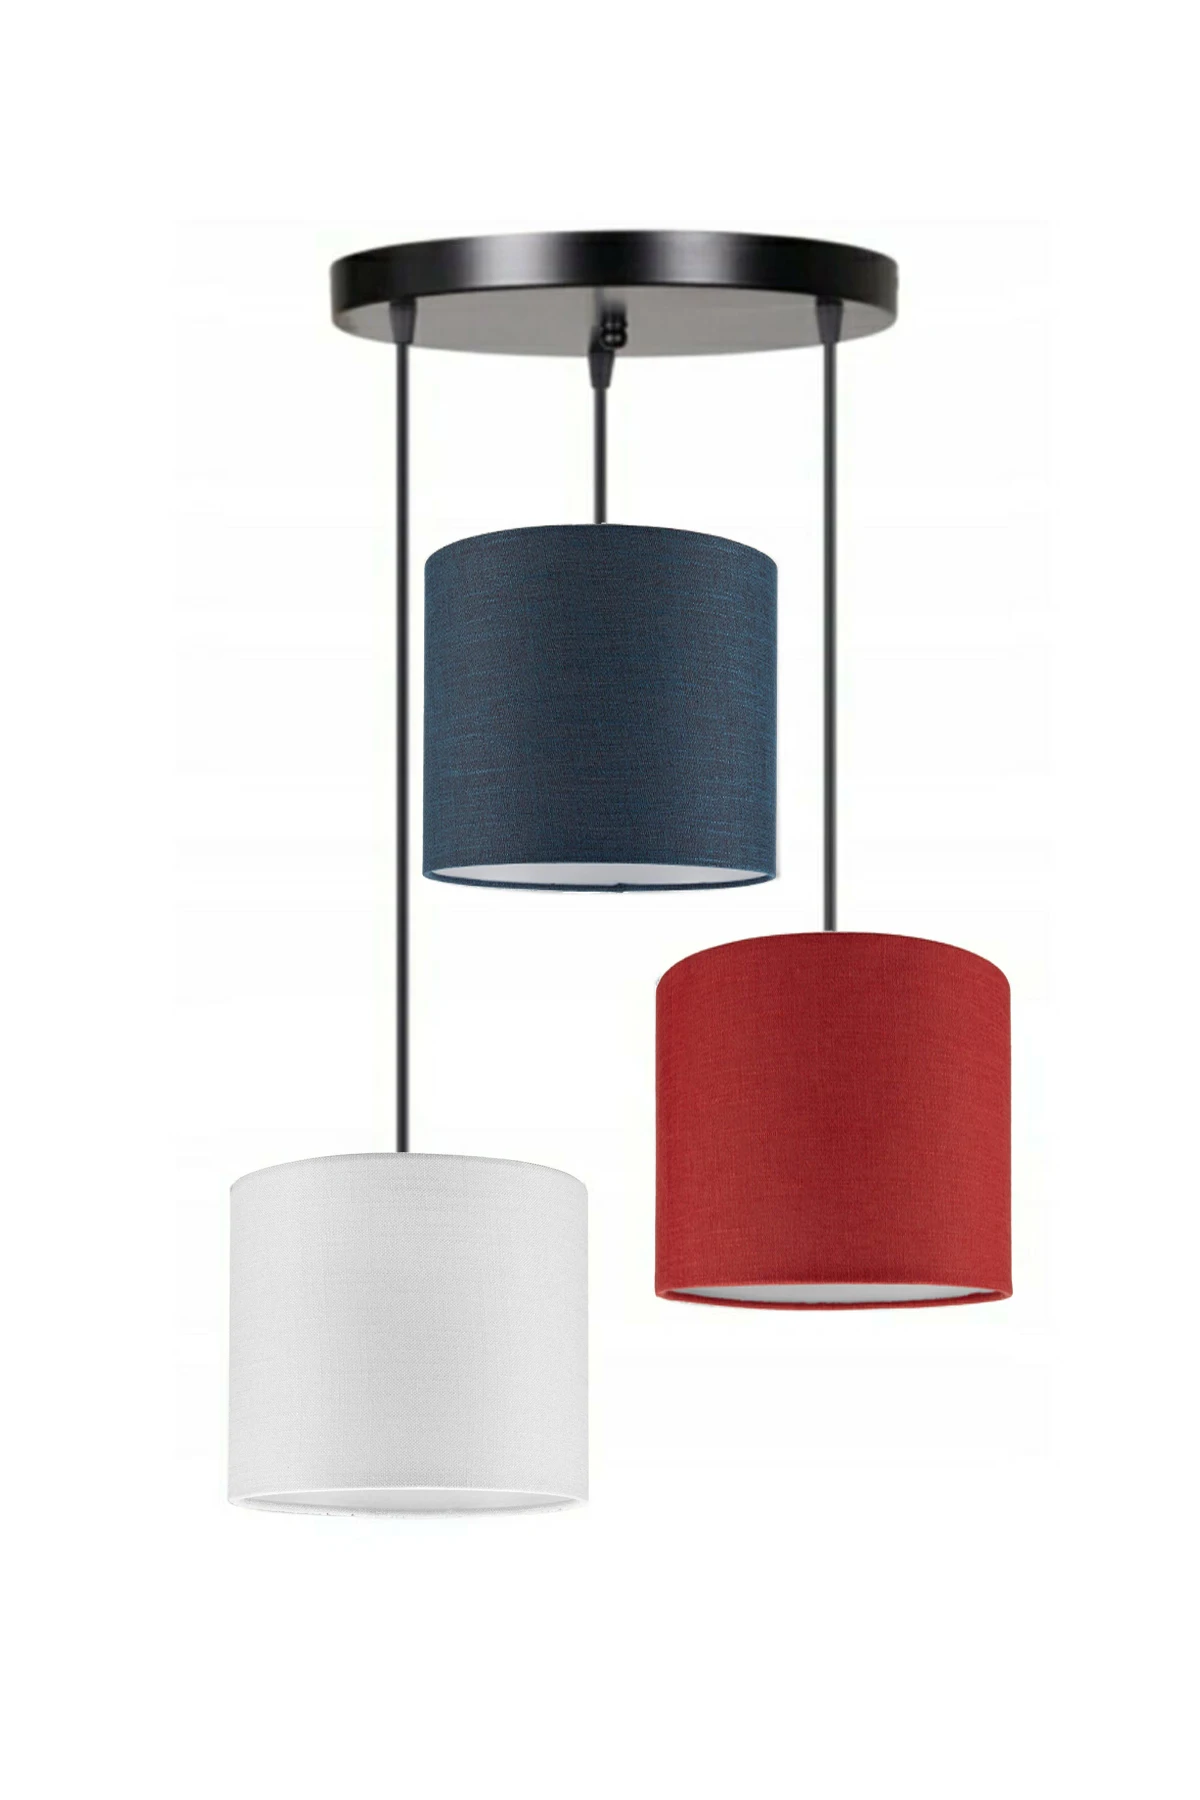 3 Heads White Navy Blue Red Fabric Cylinder Lampshade Pendant Lamp Chandelier Modern Decorative Design For Home Hotel Office Use